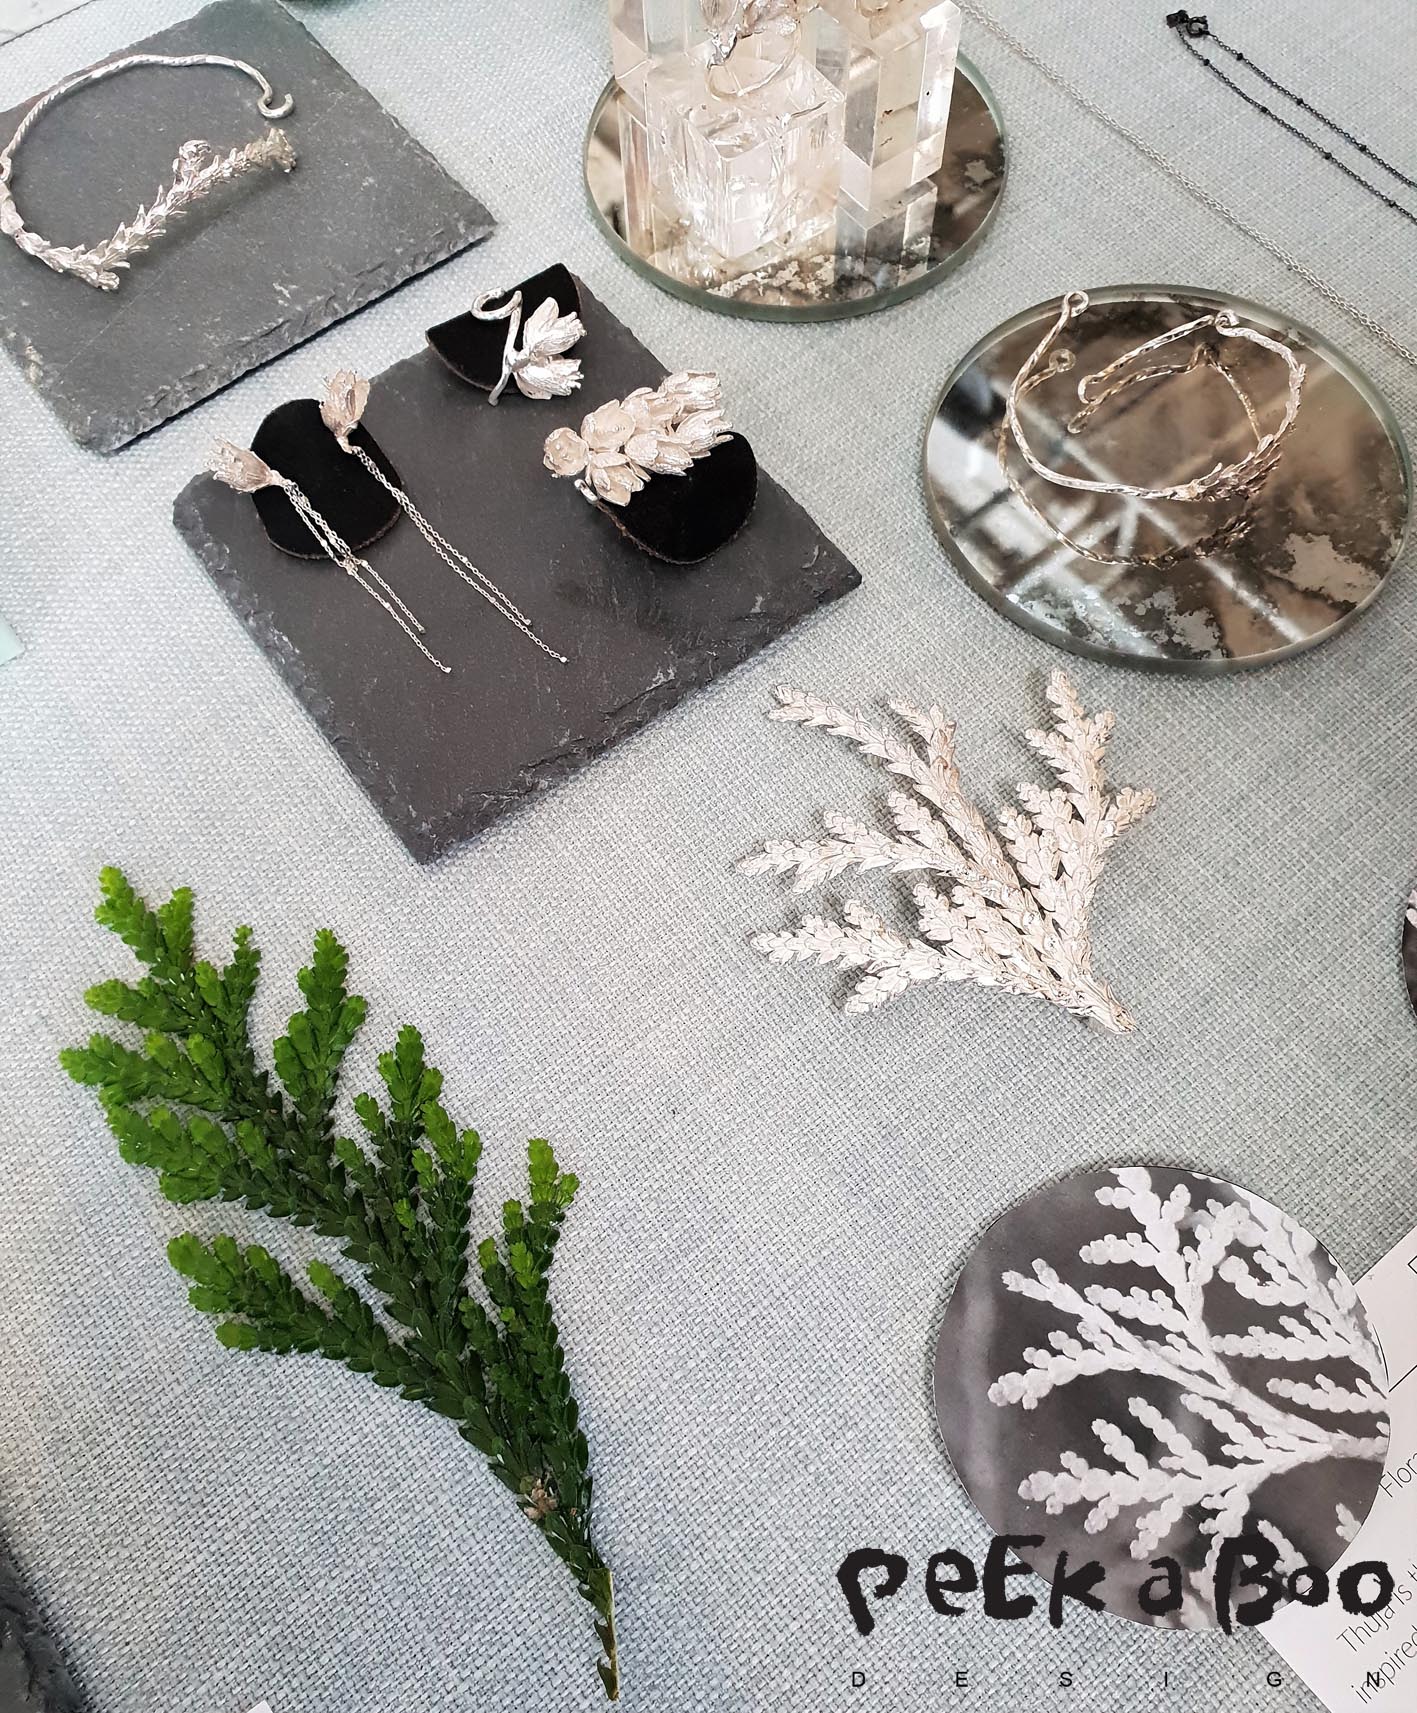 Norcapo design have made the jewellery collection Flora with inspiration of the green plant Thuja.